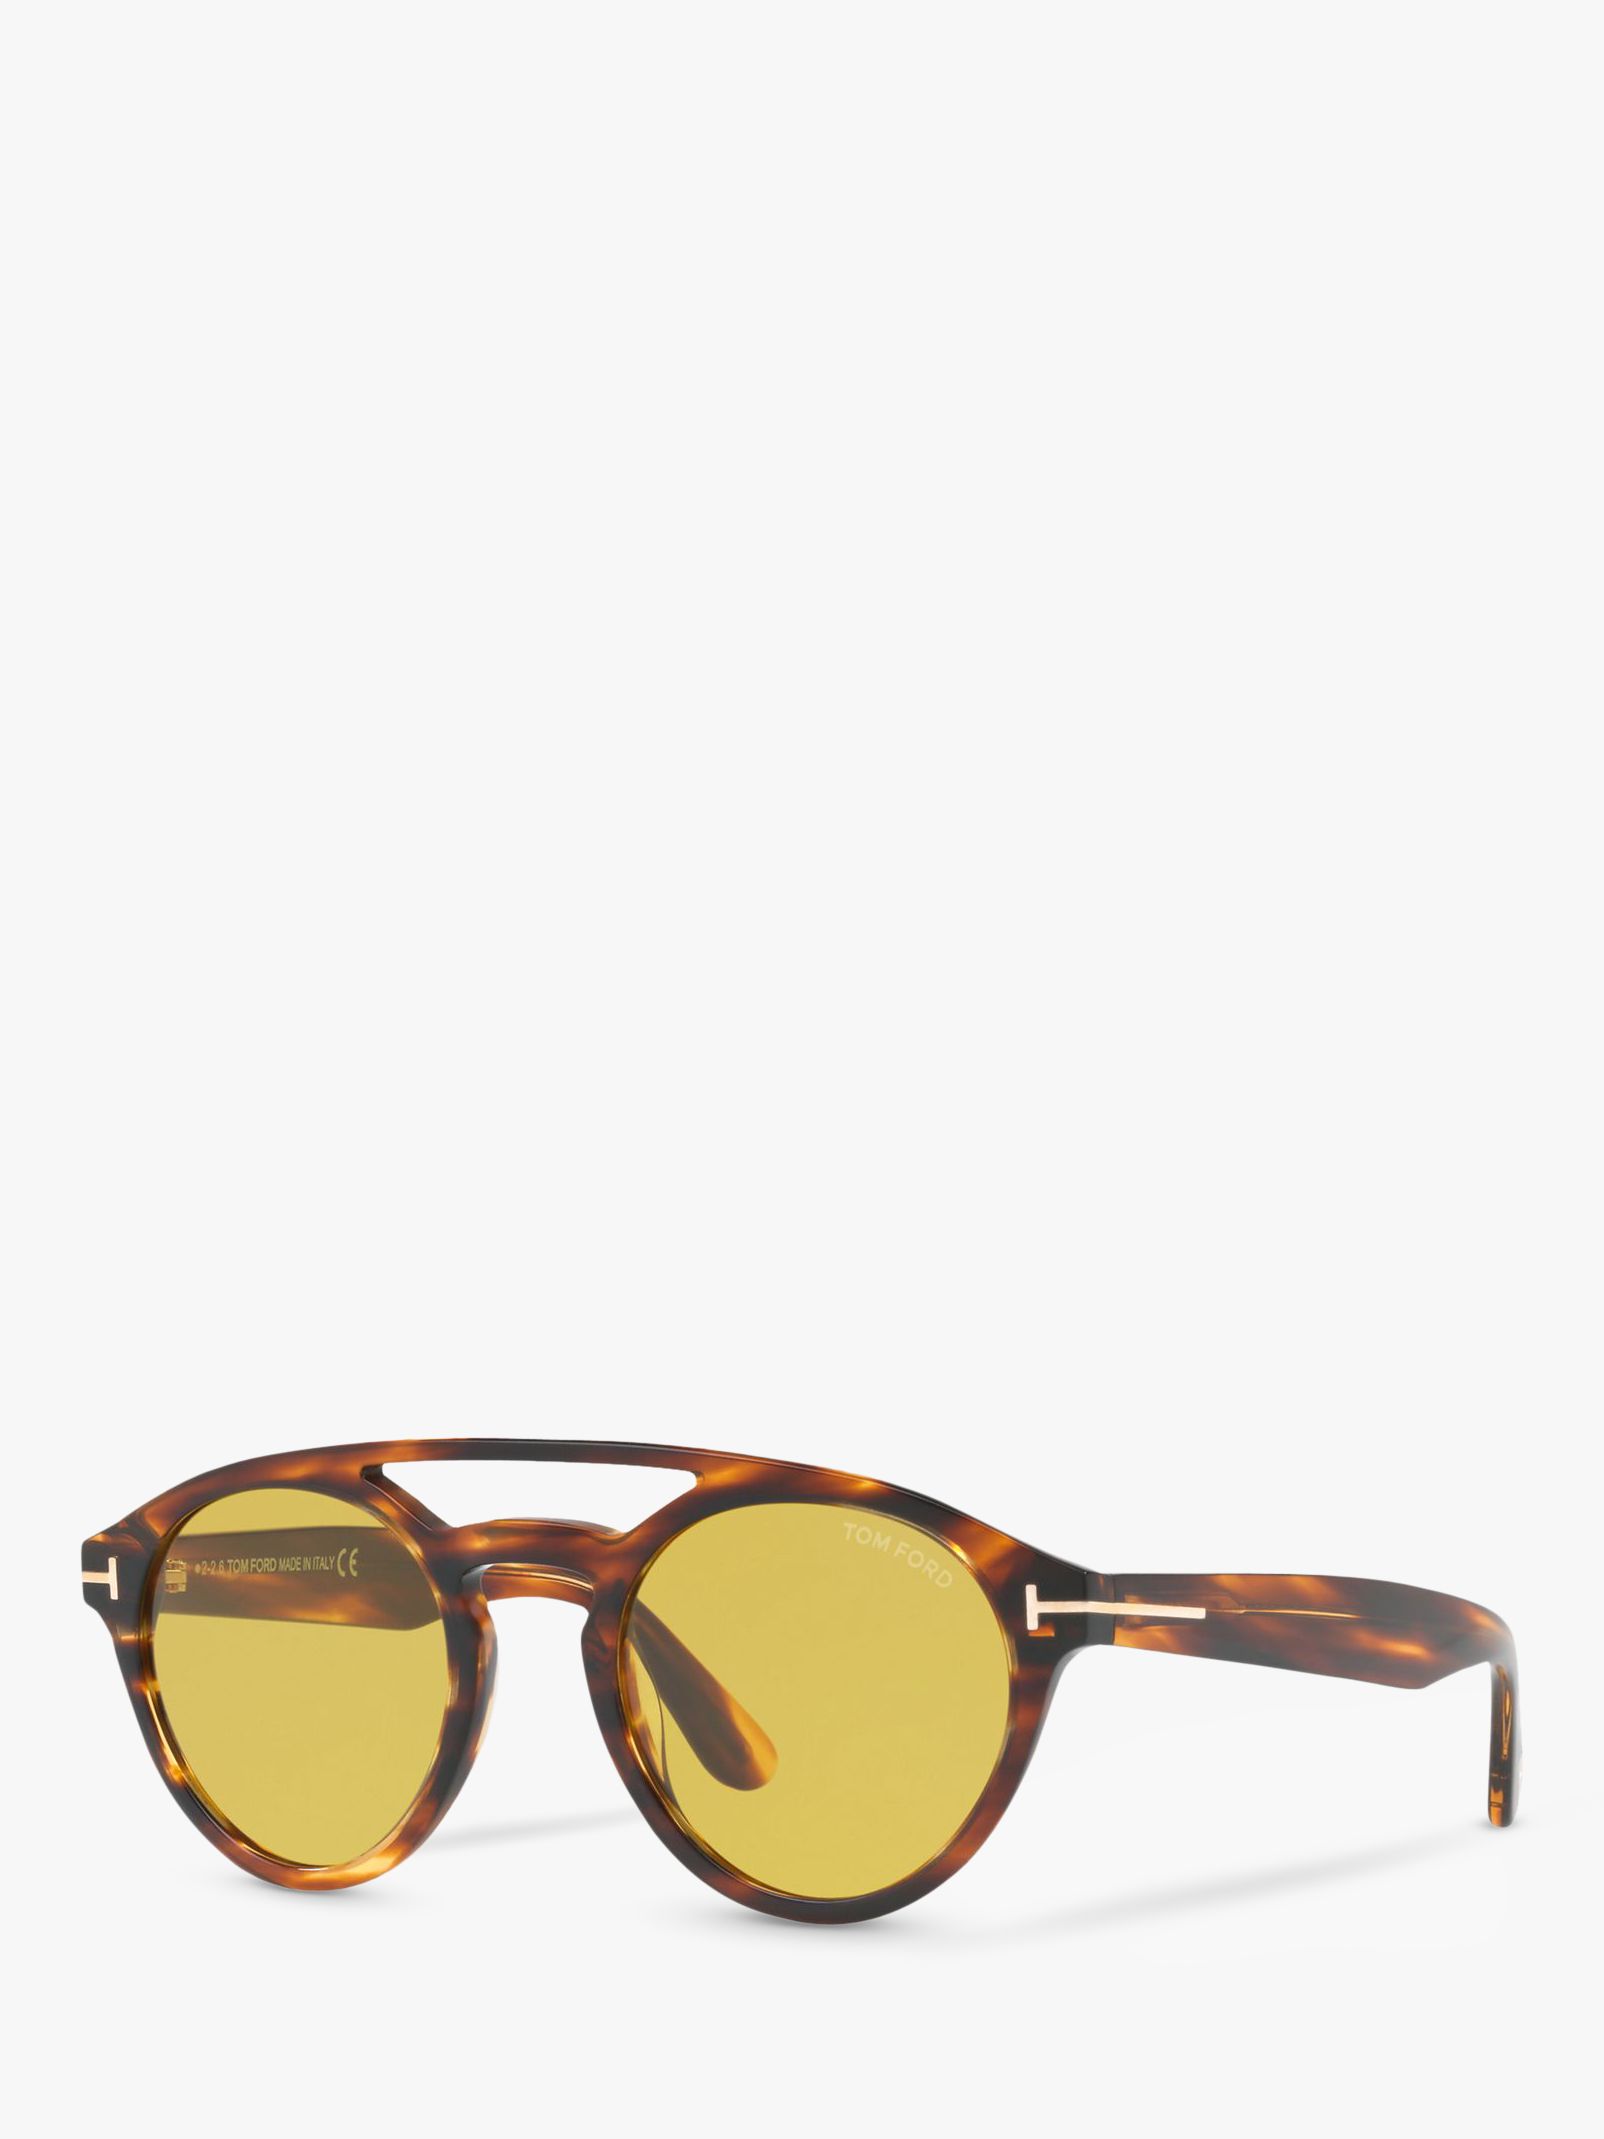 TOM FORD FT0537 Clint Round Sunglasses, Tortoise/Yellow